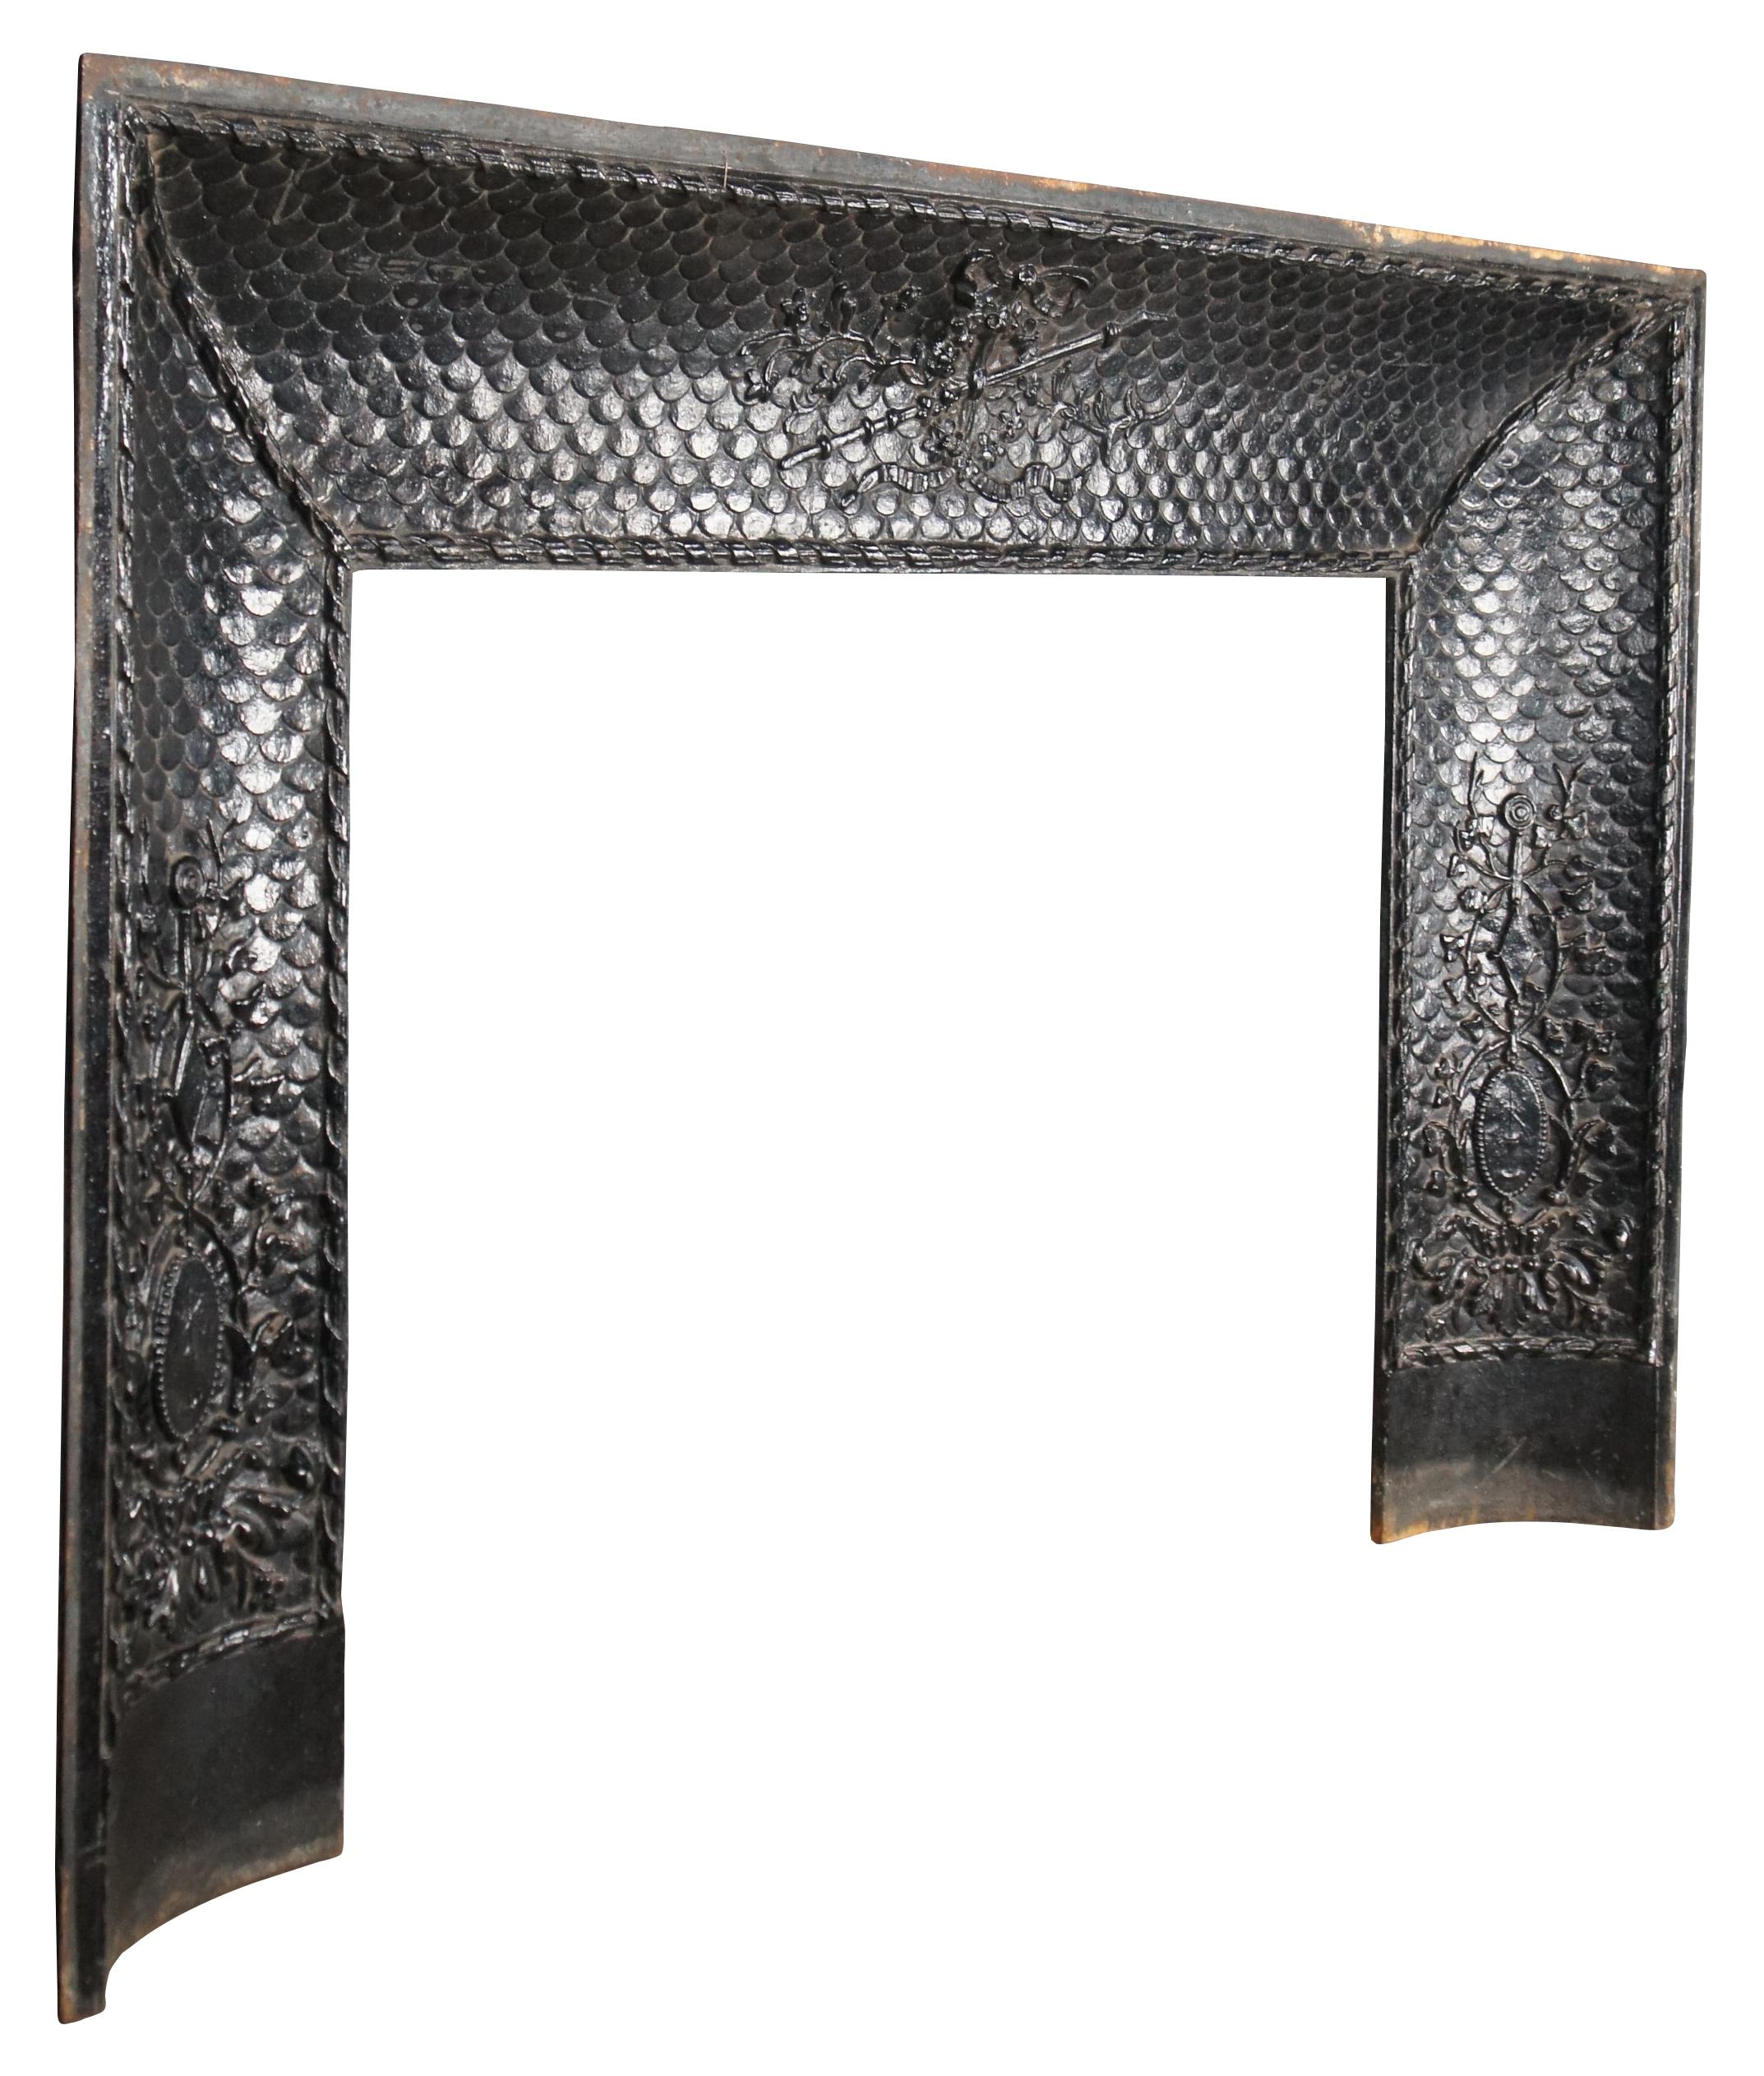 A rare and impressive mid 19th century French cast iron fireplace insert or surround. Features a concave form with meticulous detail. The insert is characterized by a field of animal scales giving off a leather like feel. At the center is a floral